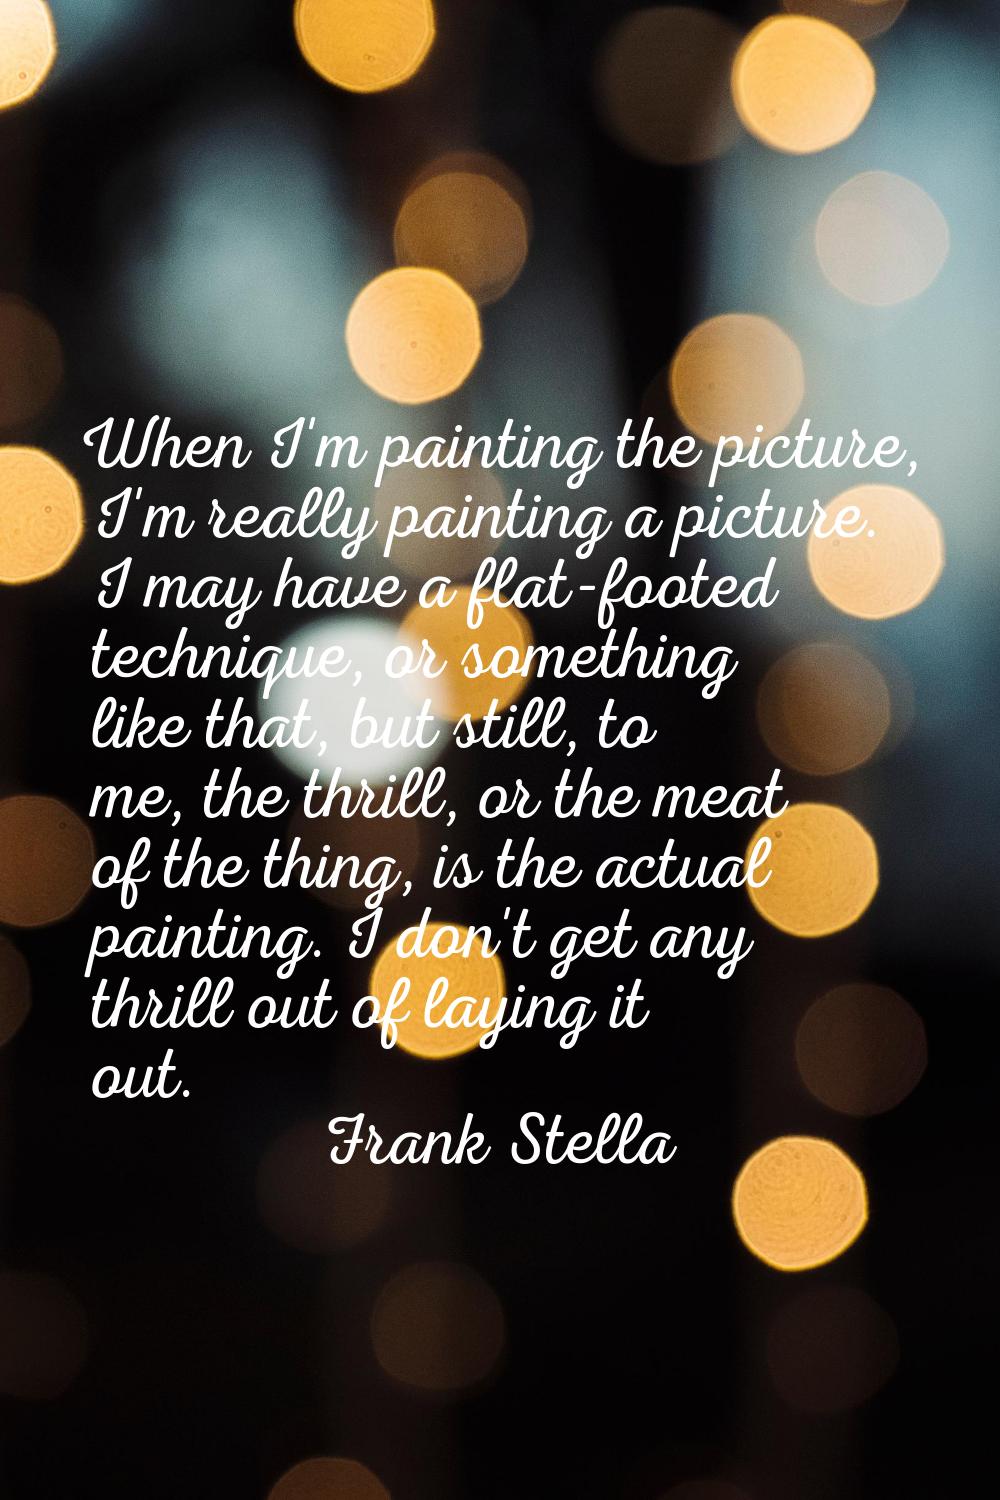 When I'm painting the picture, I'm really painting a picture. I may have a flat-footed technique, o